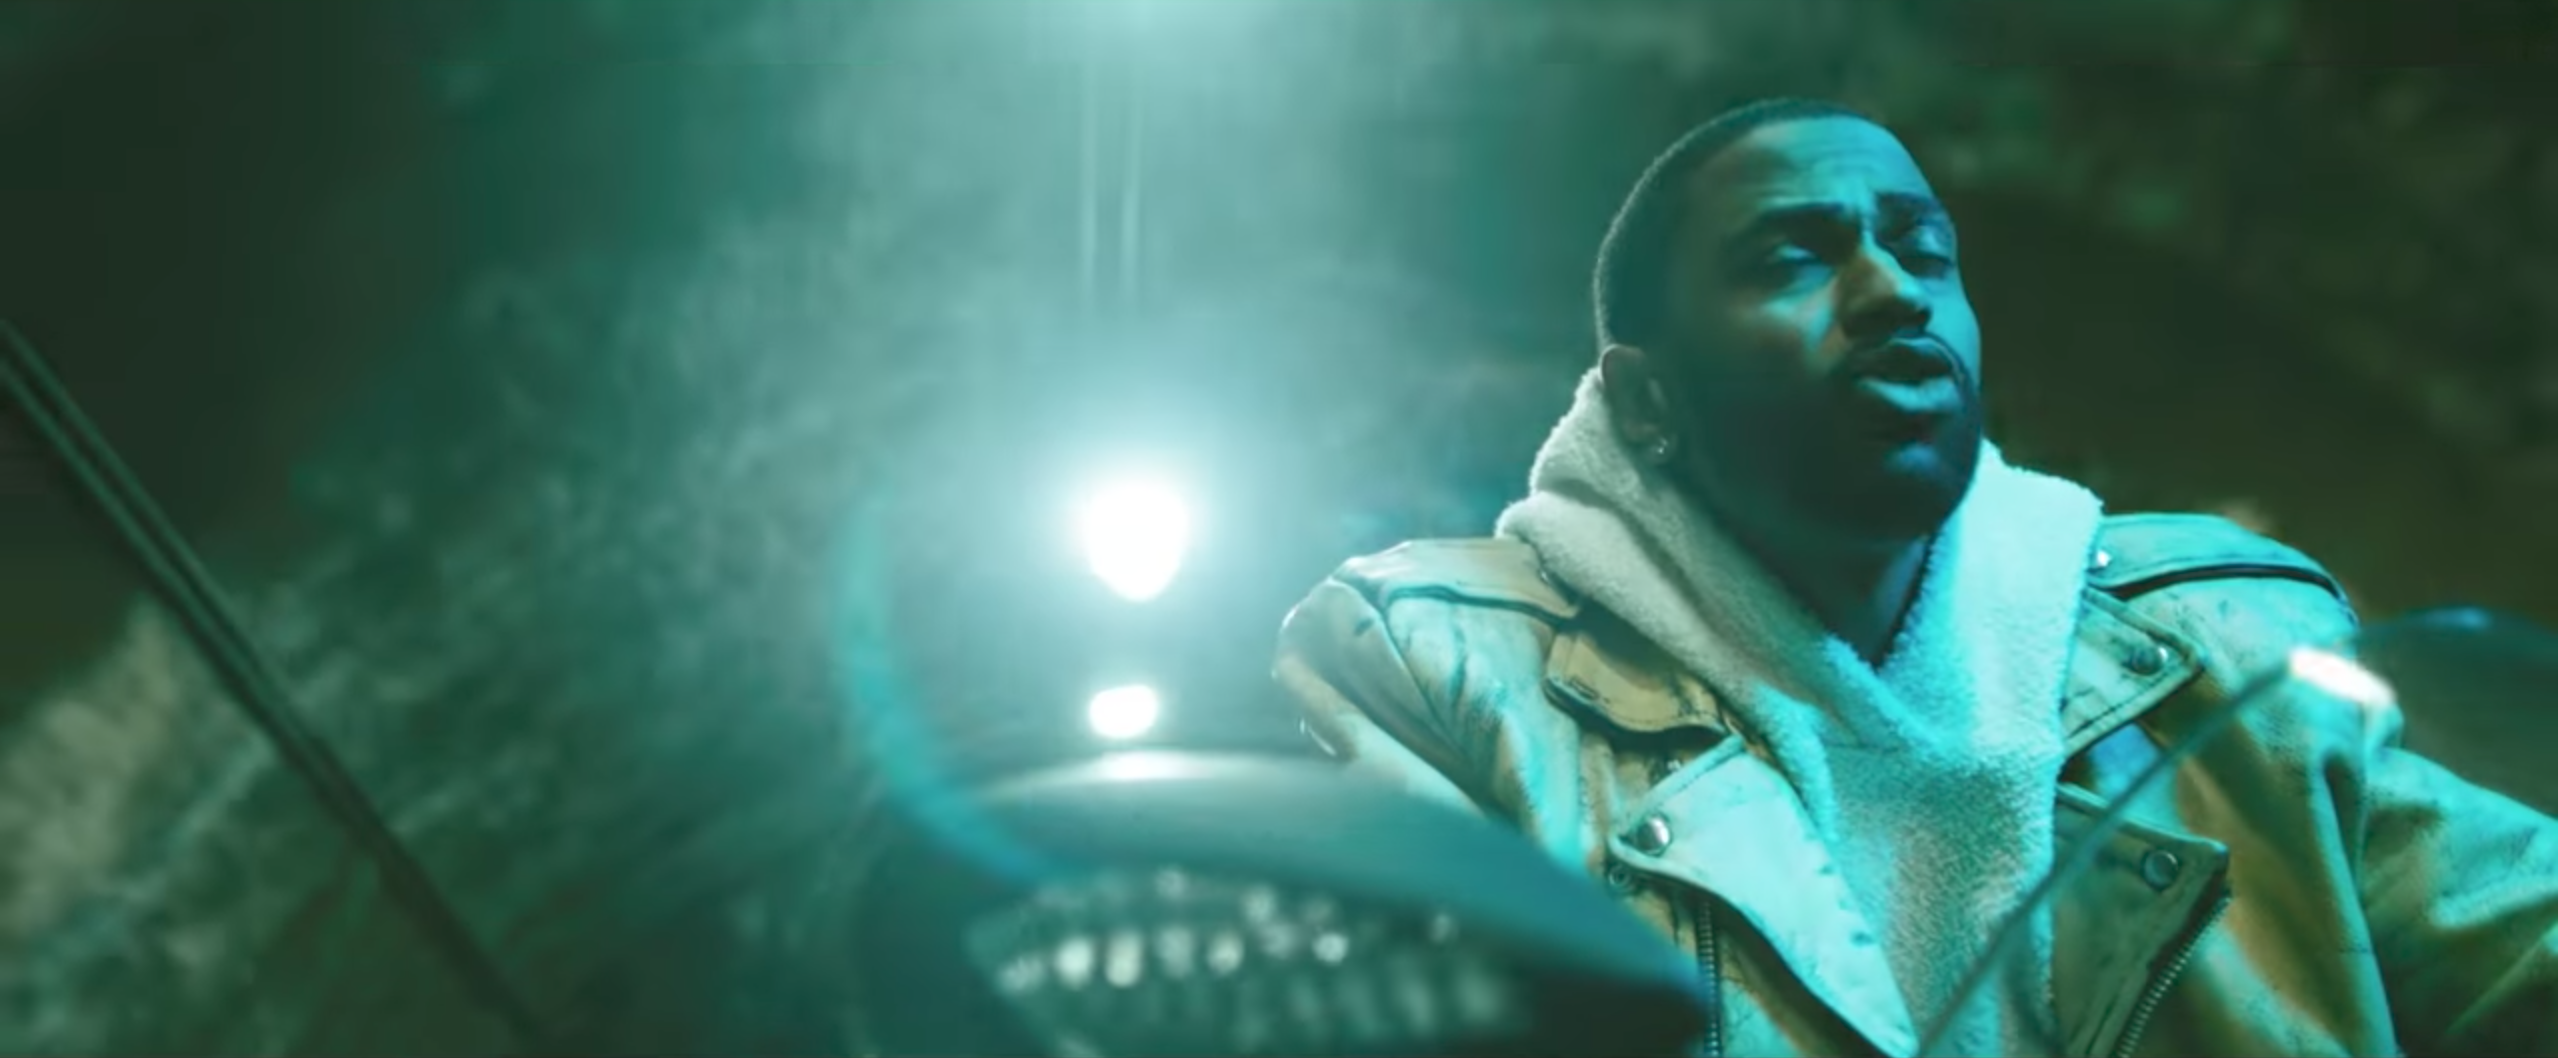 Get The Look: Big Sean Ft. Migos 'Sacrifices' Music Video – PAUSE Online